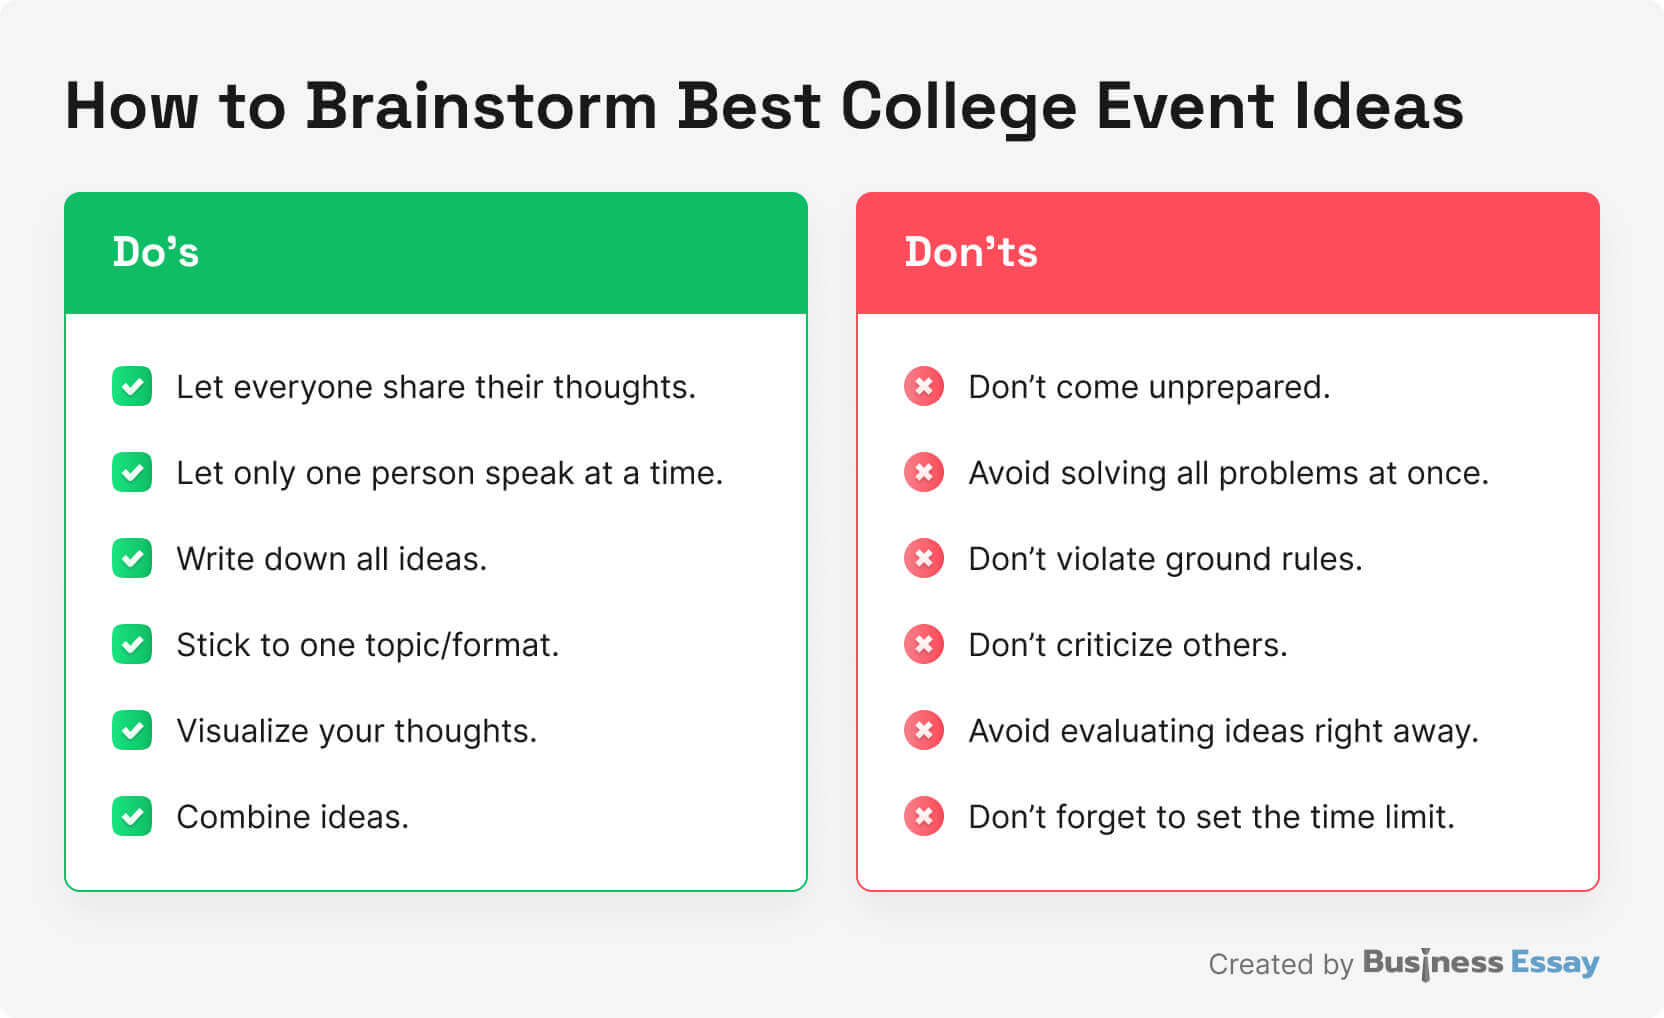 The picture provides the Do's and Don'ts of the brainstorming process.